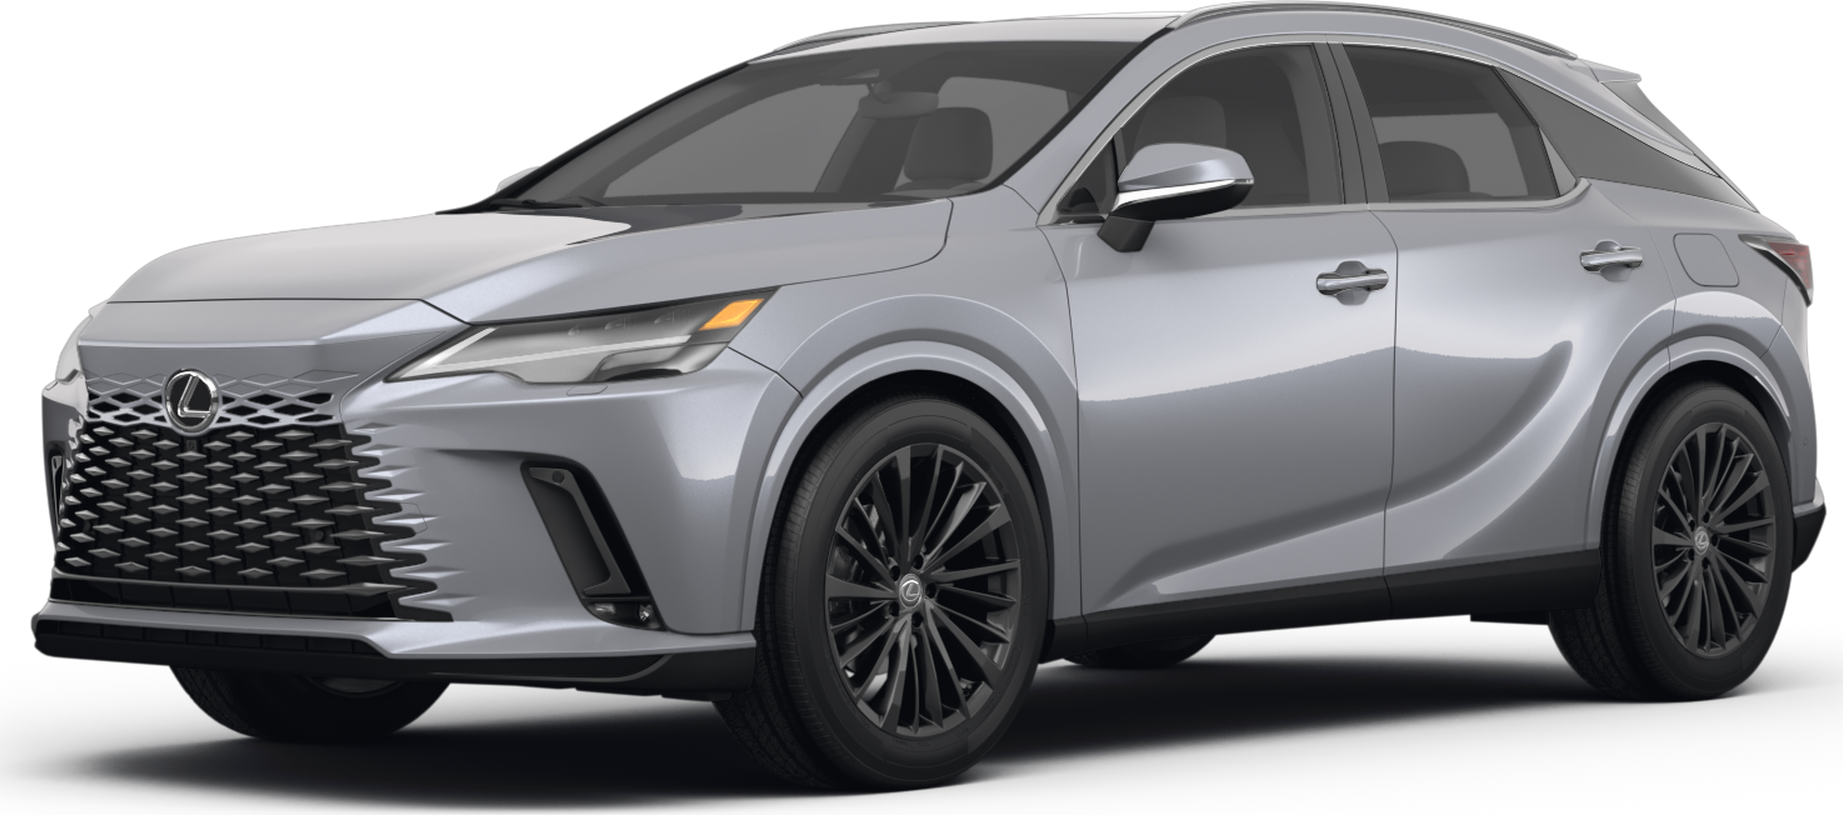 2024 Lexus Rx 350 Colors Top 70+ Images And 10+ Videos